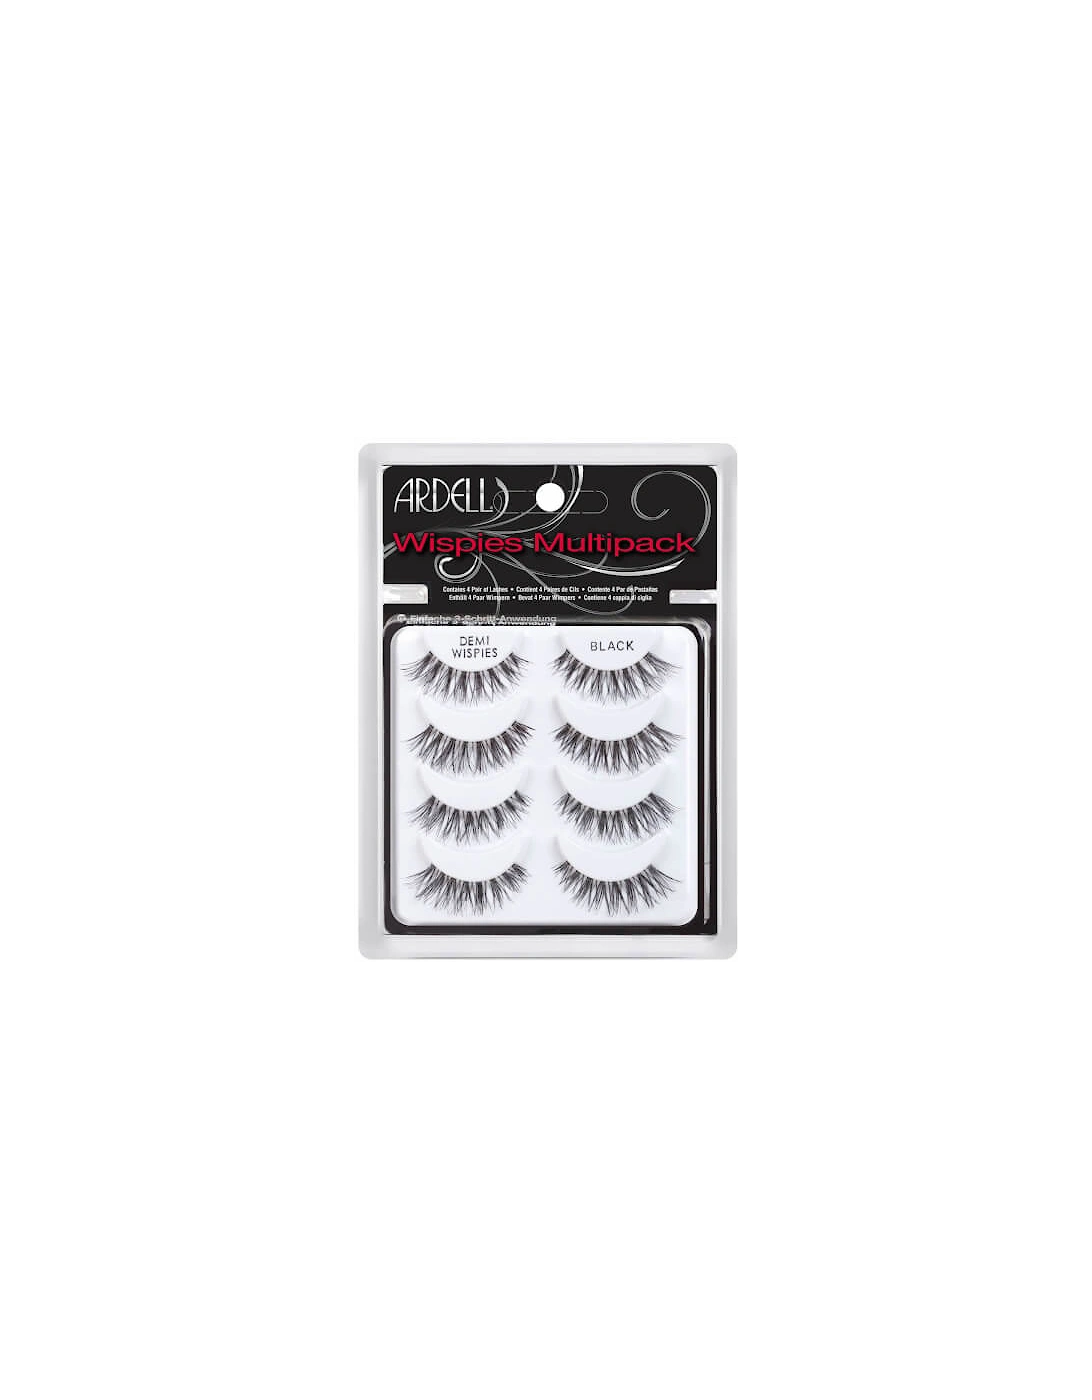 Demi Wispies False Lashes Multipack 4 Pack - Ardell, 2 of 1